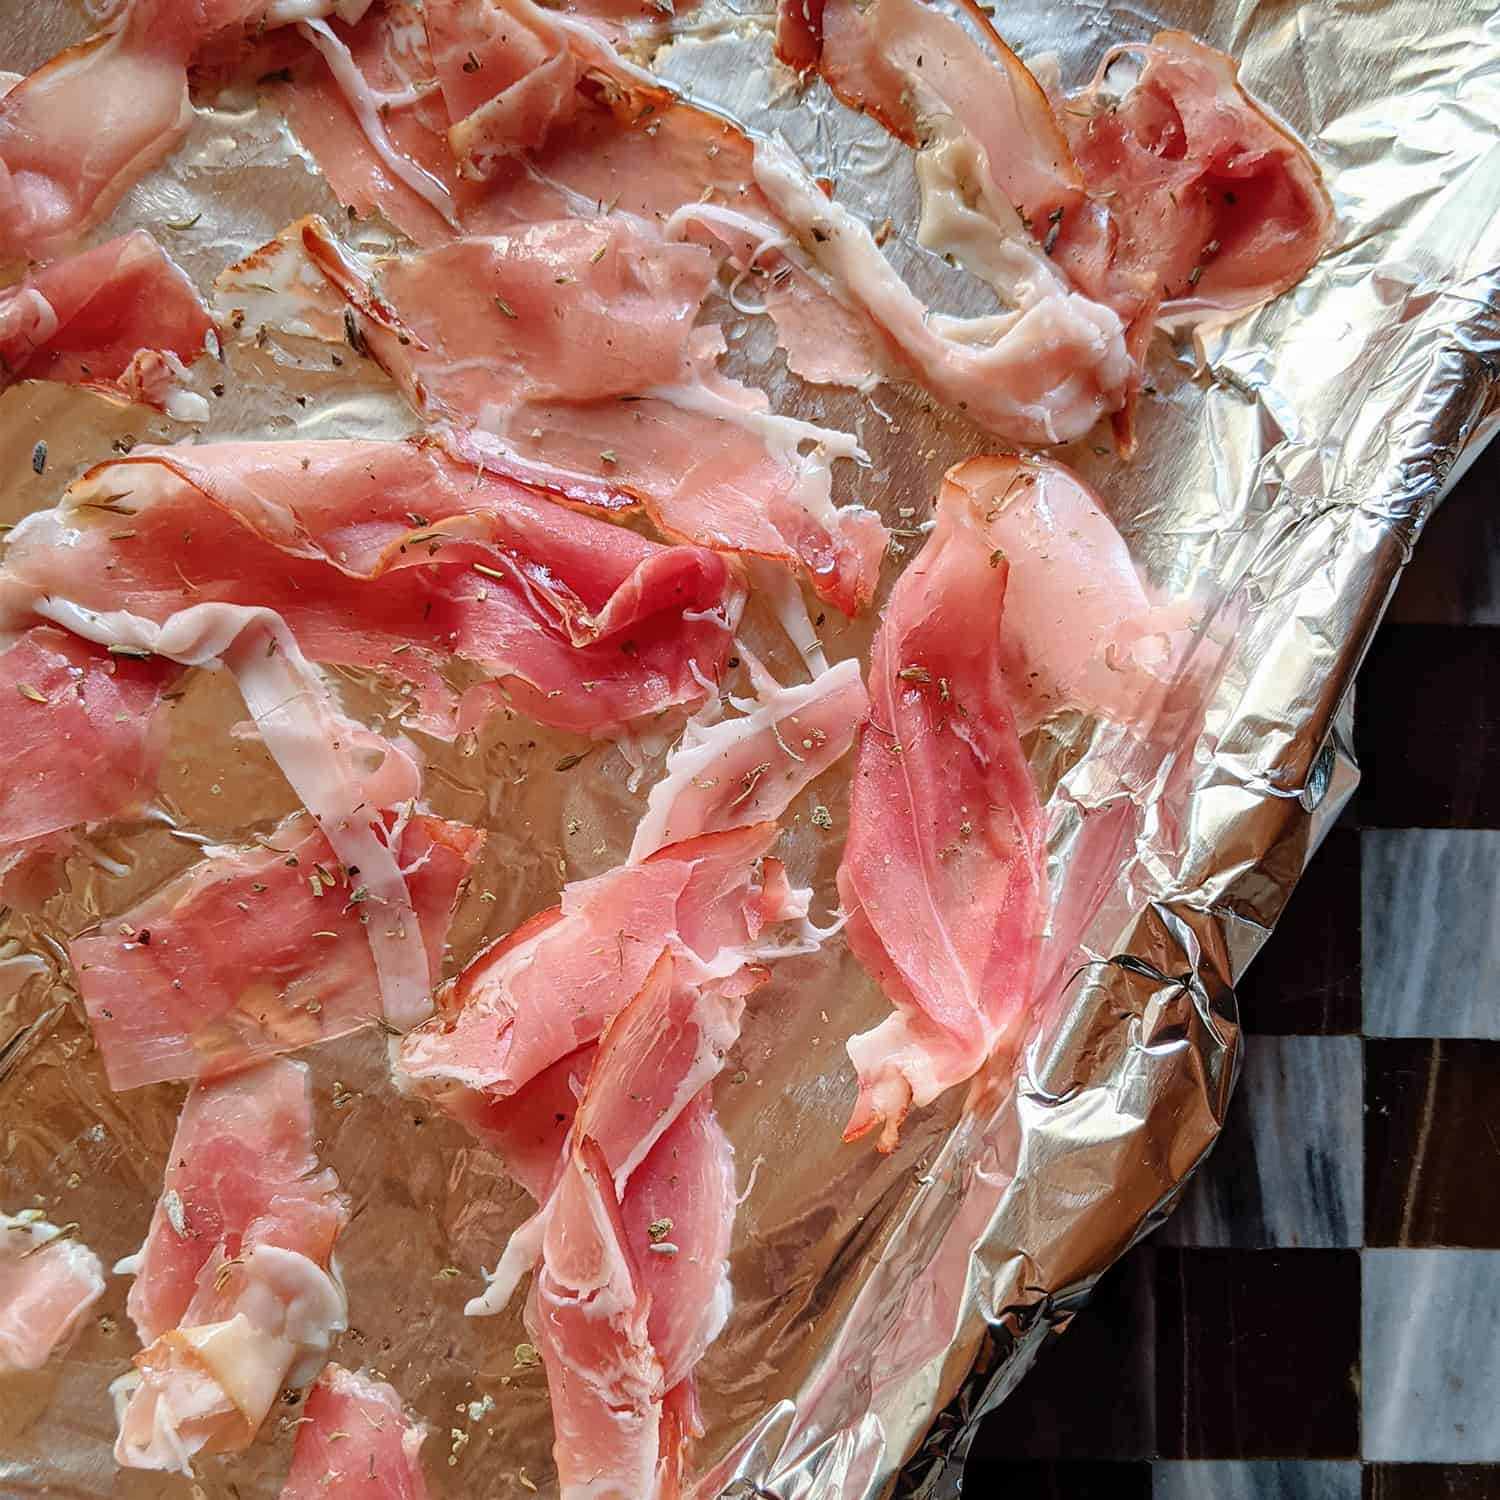 Citrus Salad with the Prosciutto prepped on a baking sheet